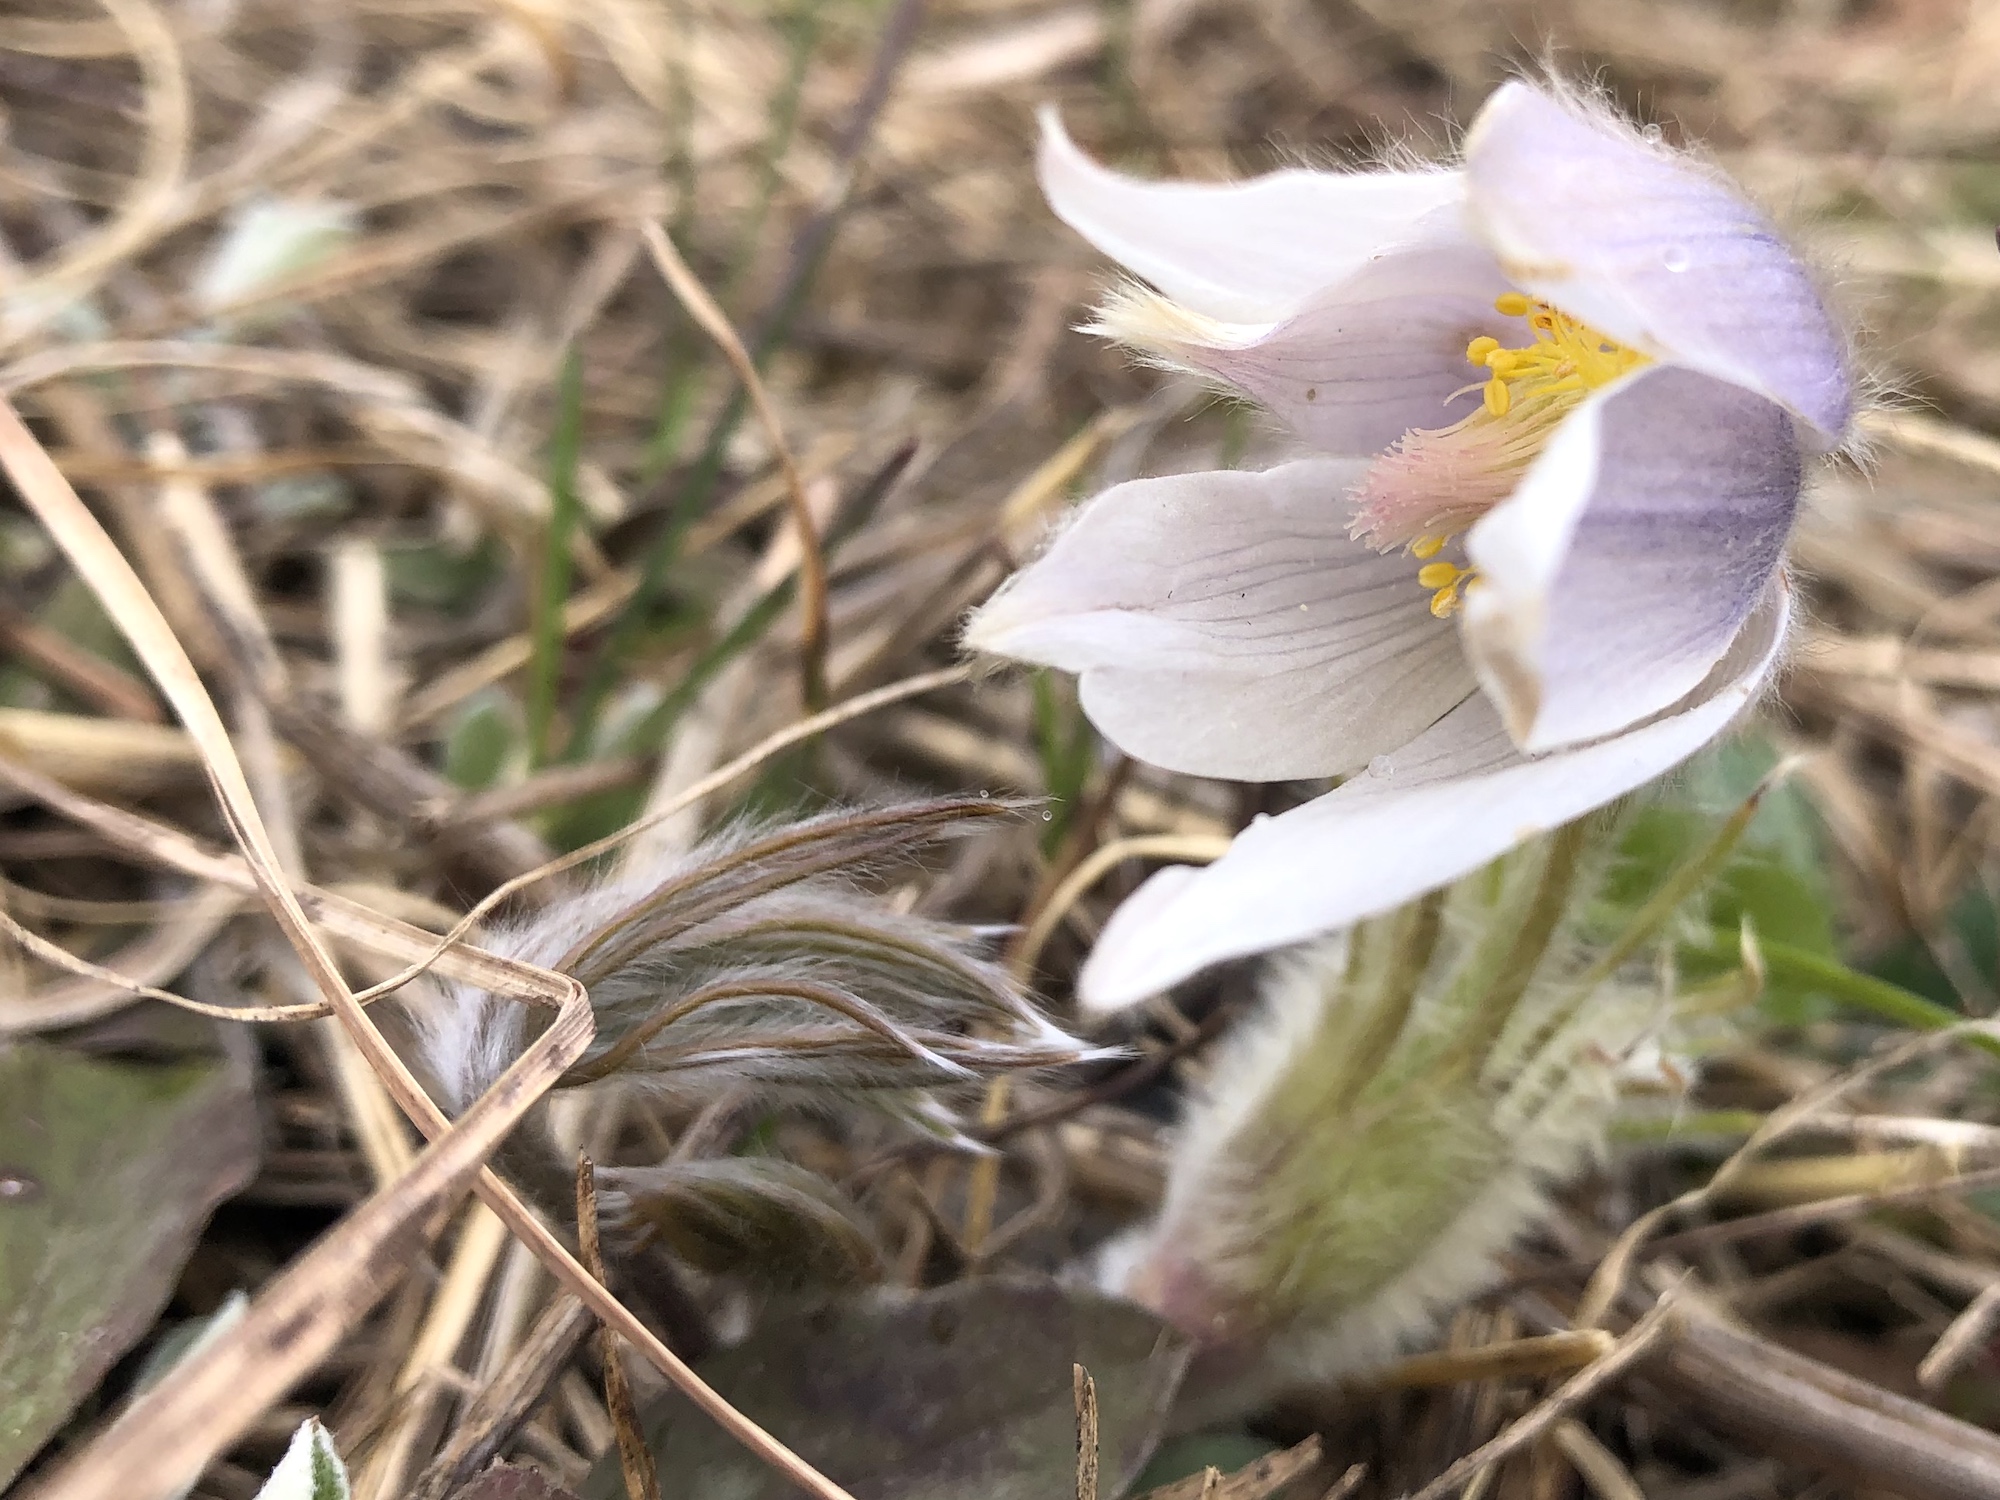 Pasque flower on Pasque Flower Hill near East Raymond Road Park in Madison, Wisconsin on April 20, 2021.